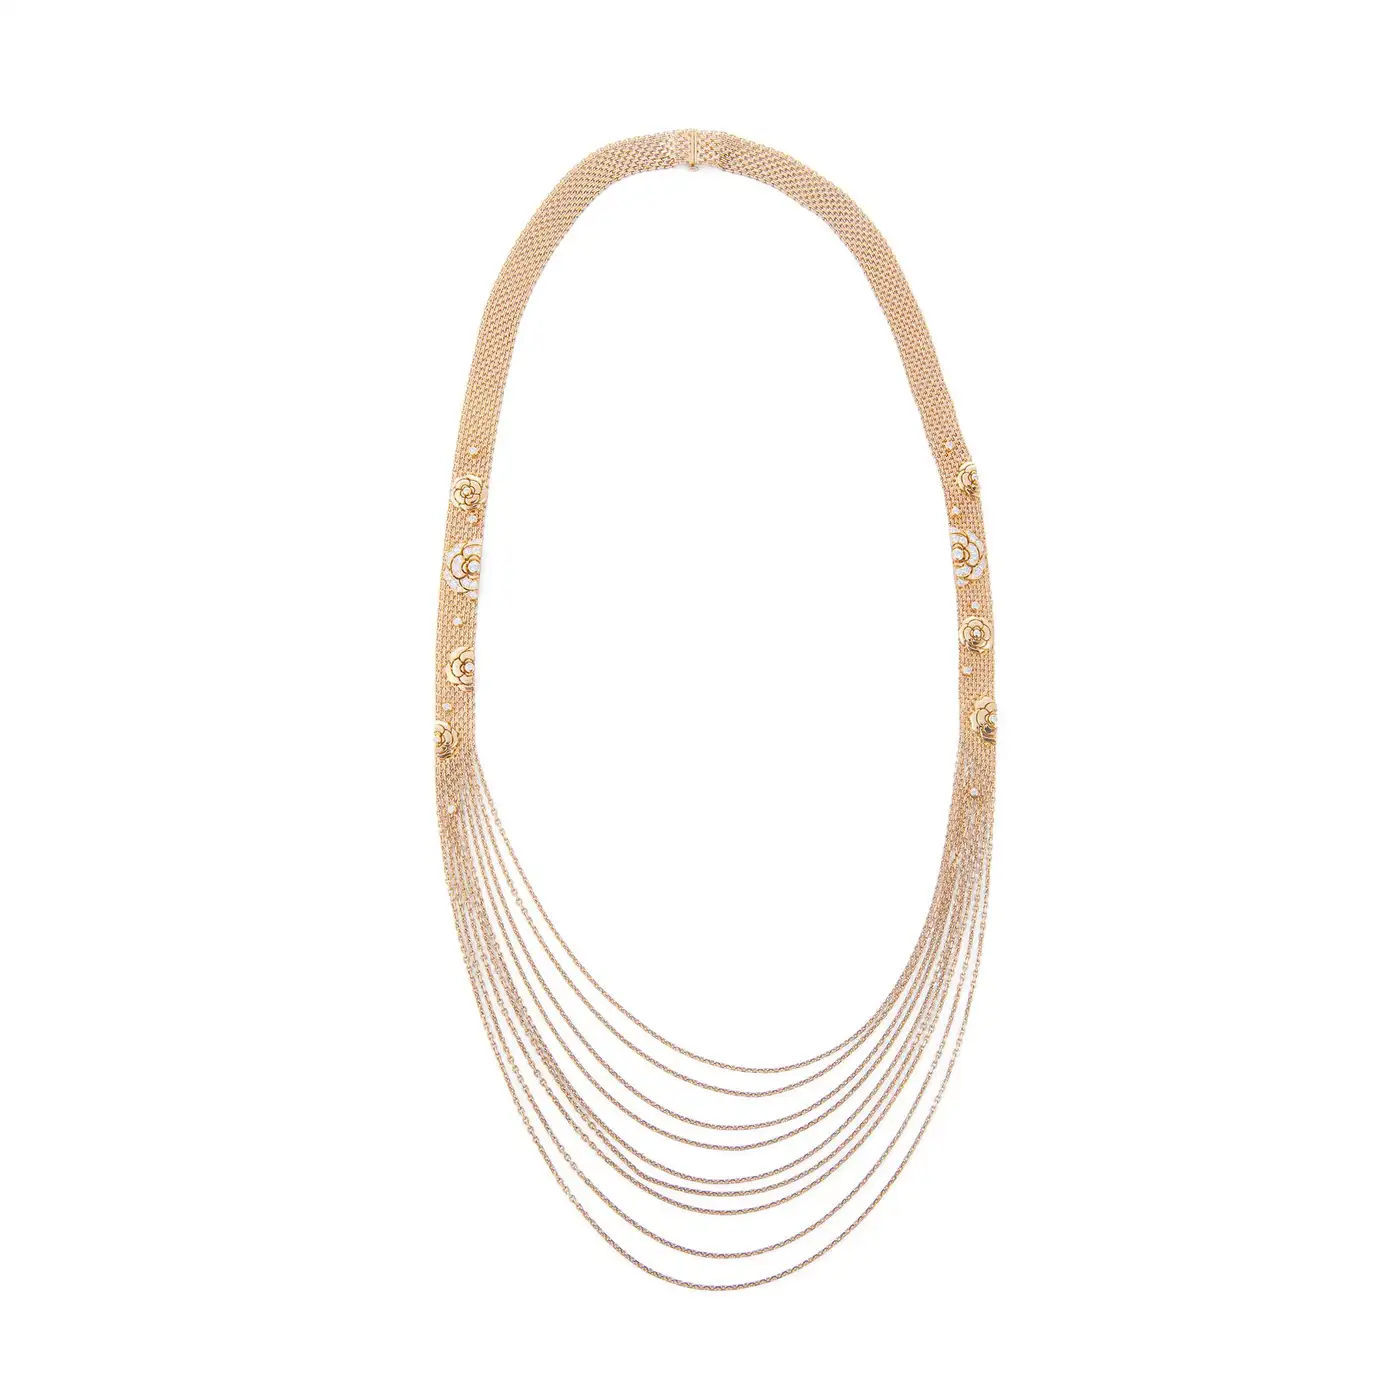 Chanel-Gold-and-Diamond-Camellia-Multi-Strand-Flapper-Necklace-3.webp